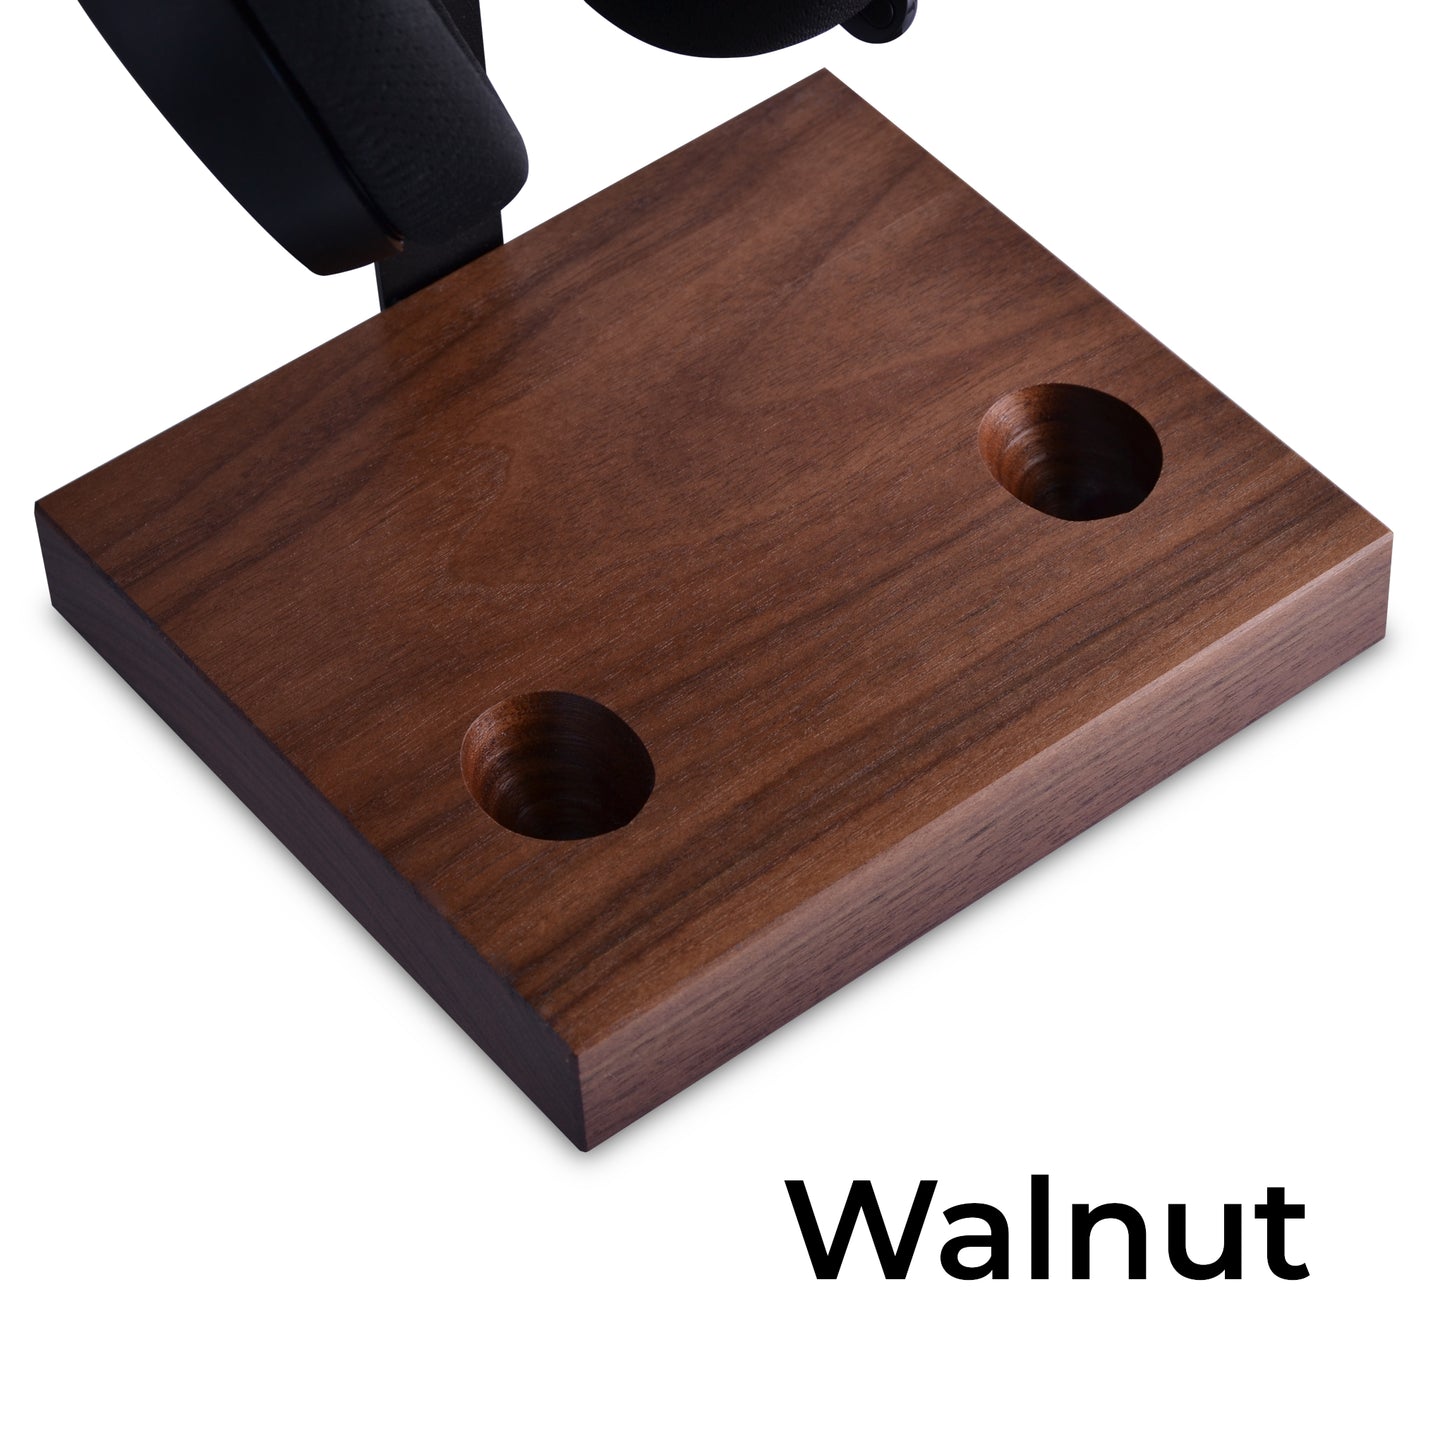 Walnut version of headset and controller stand for Xbox one controller